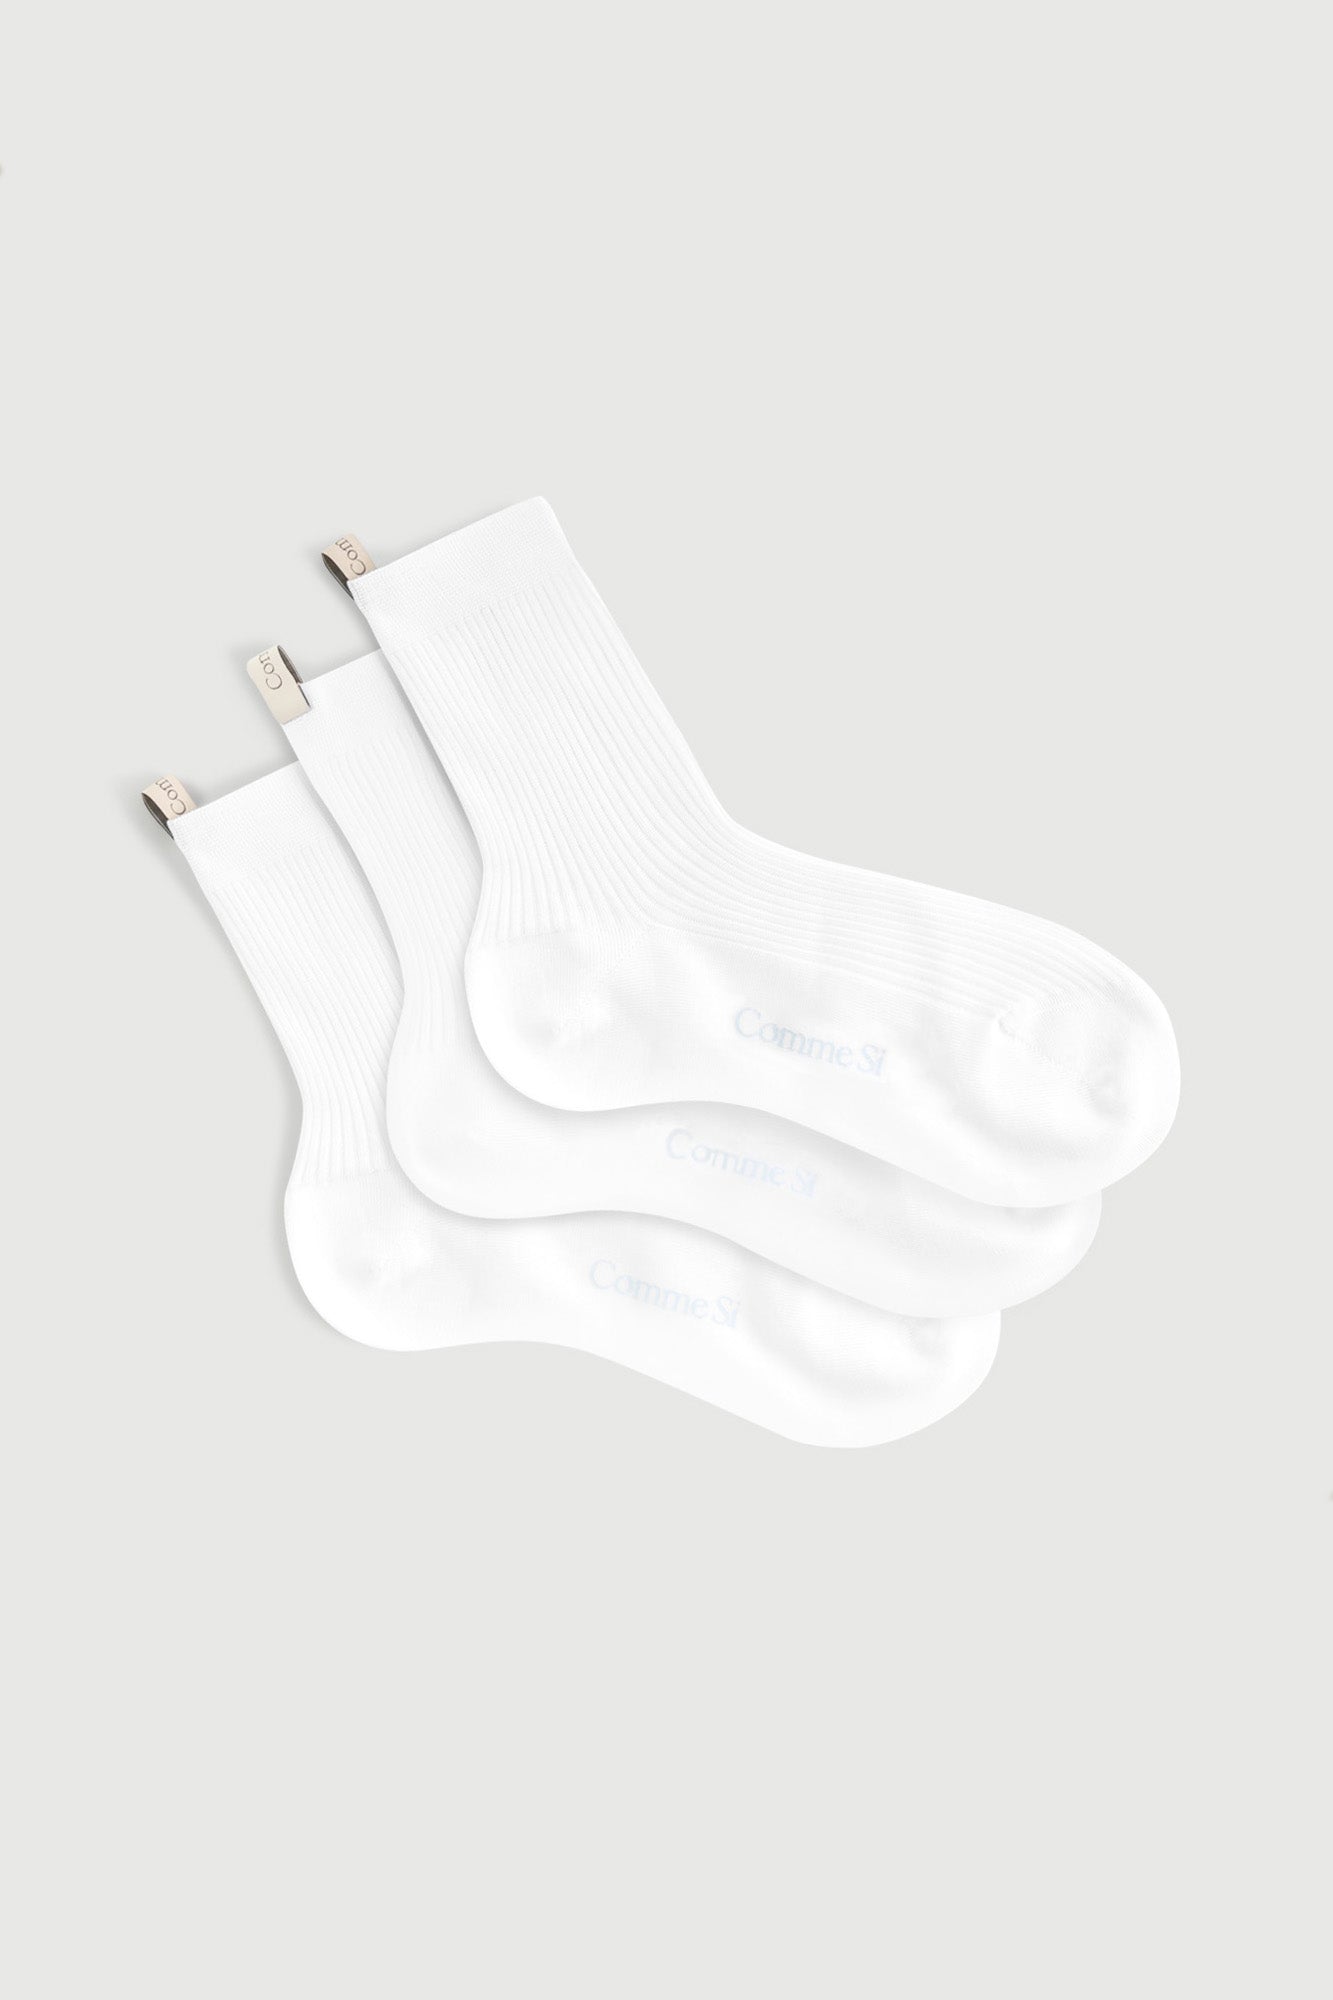 The Agnelli Trio, Egyptian Cotton Sock Set of three pairs in white, by Comme Si